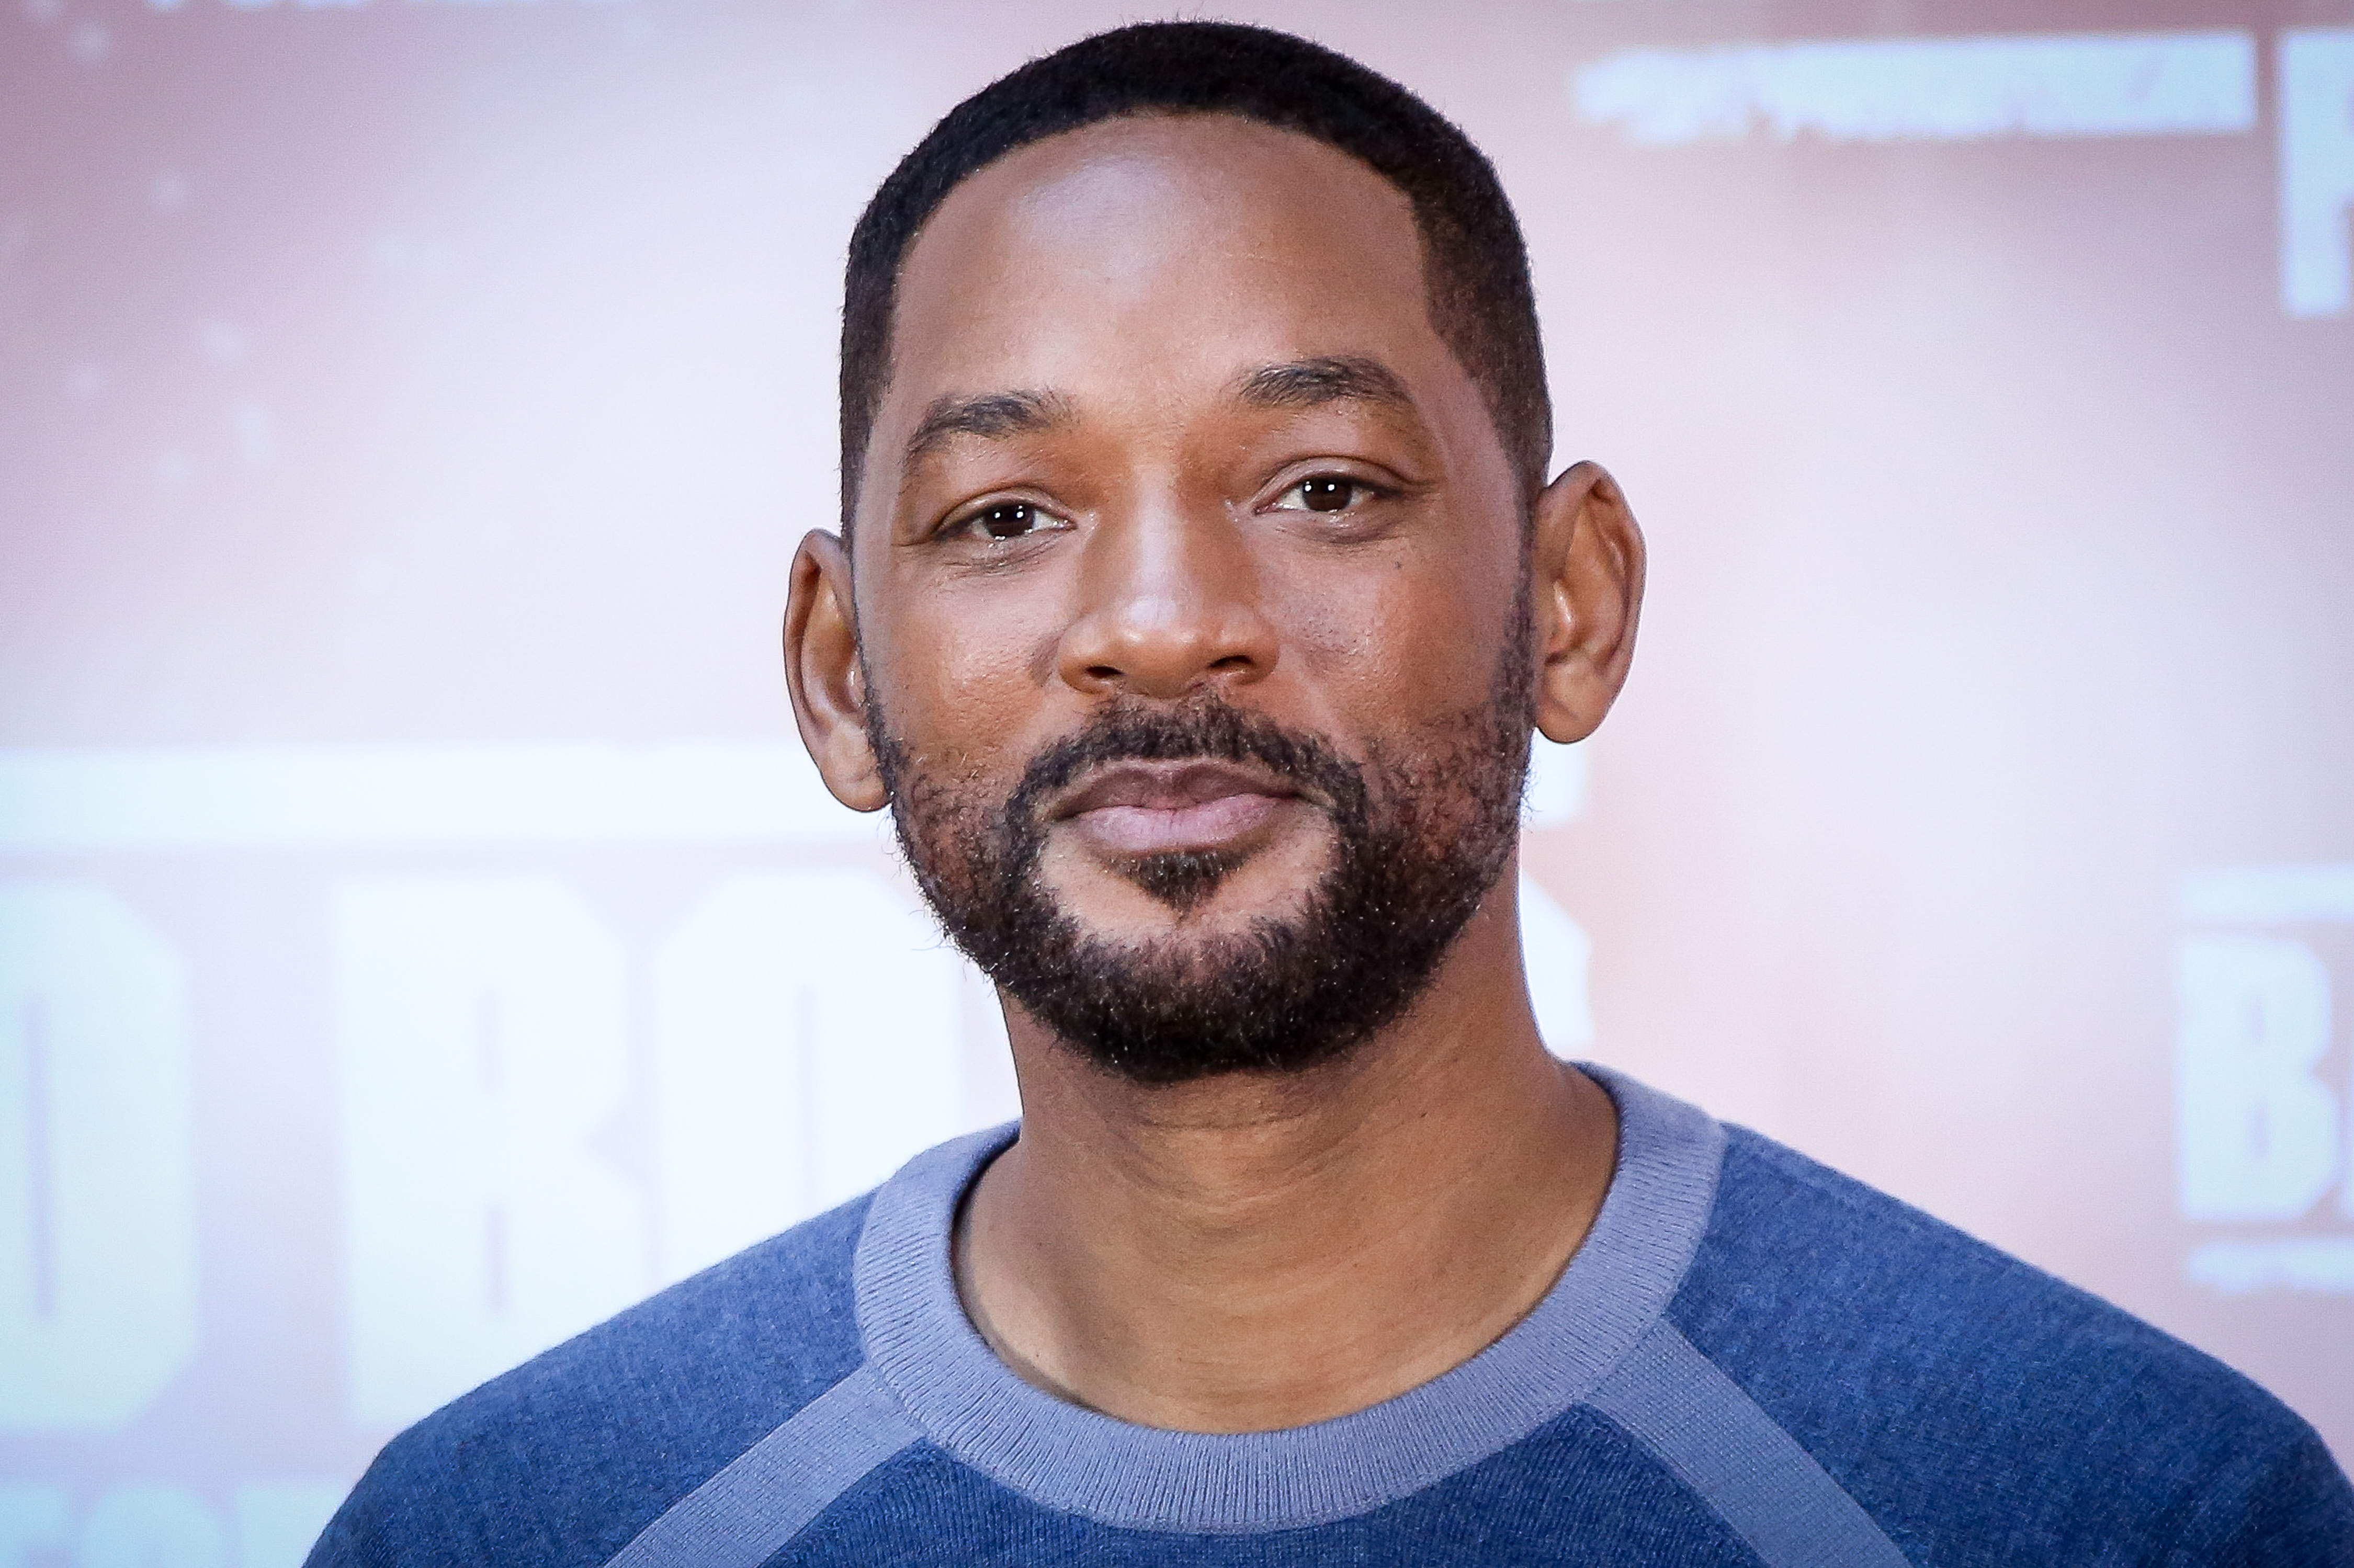 Will Smith attends "Bad Boys For Life" photocall in Madrid, Spain on January 8, 2020. | Source: Getty Images